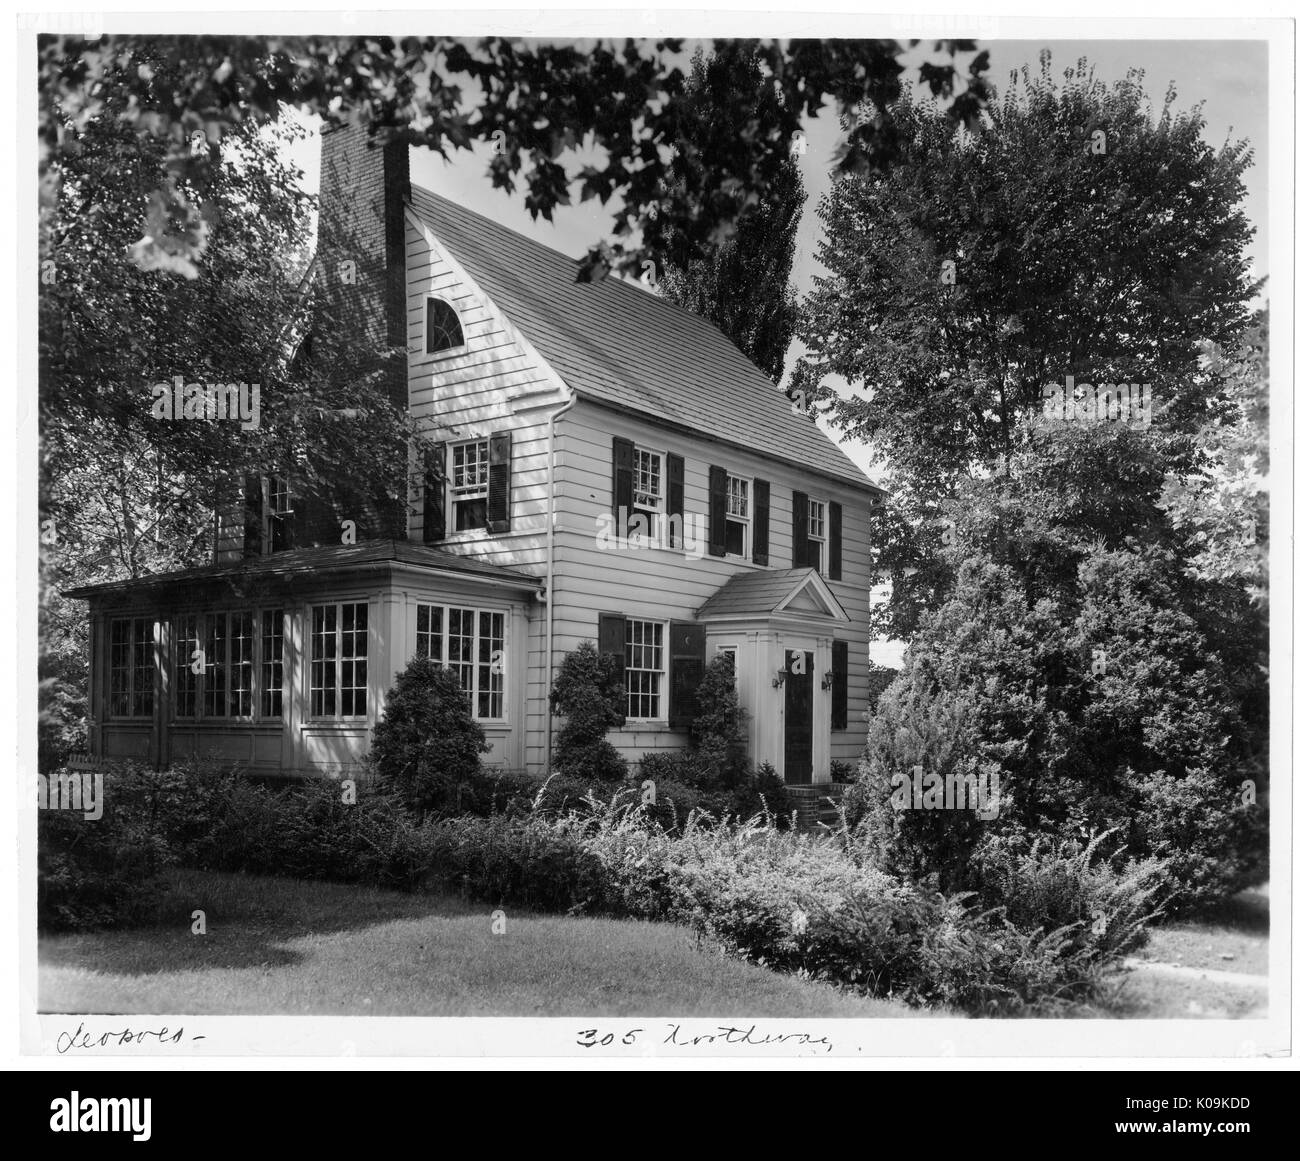 Landscape diagonal shot of a white house with an annexed sun room, surrounded by many trees and shrubs with leaves, Roland Park/Guilford, Baltimore, Maryland, 1910. This image is from a series documenting the construction and sale of homes in the Roland Park/Guilford neighborhood of Baltimore, a streetcar suburb and one of the first planned communities in the United States. The neighborhood was segregated, and is considered an early example of the enforcement of racial segregation through the use of restricted covenants. Stock Photo